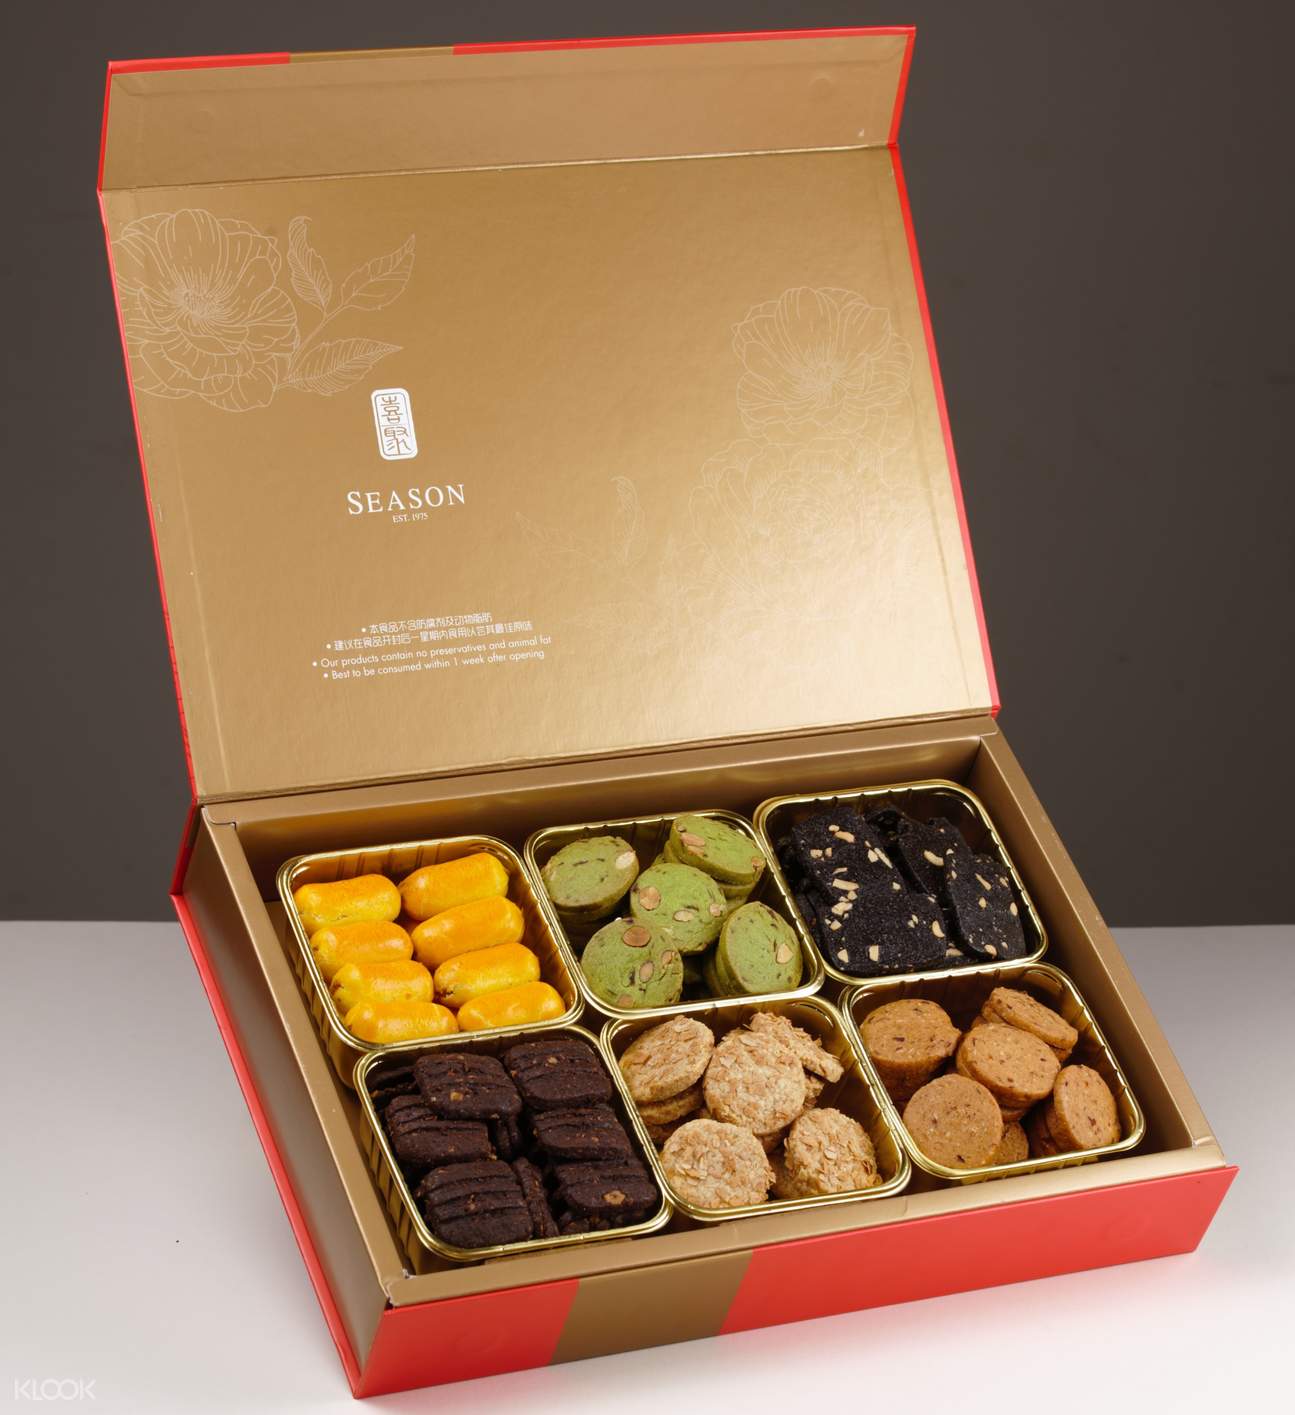 CNY Season Confectionery & Bakery Delivery in Singapore by